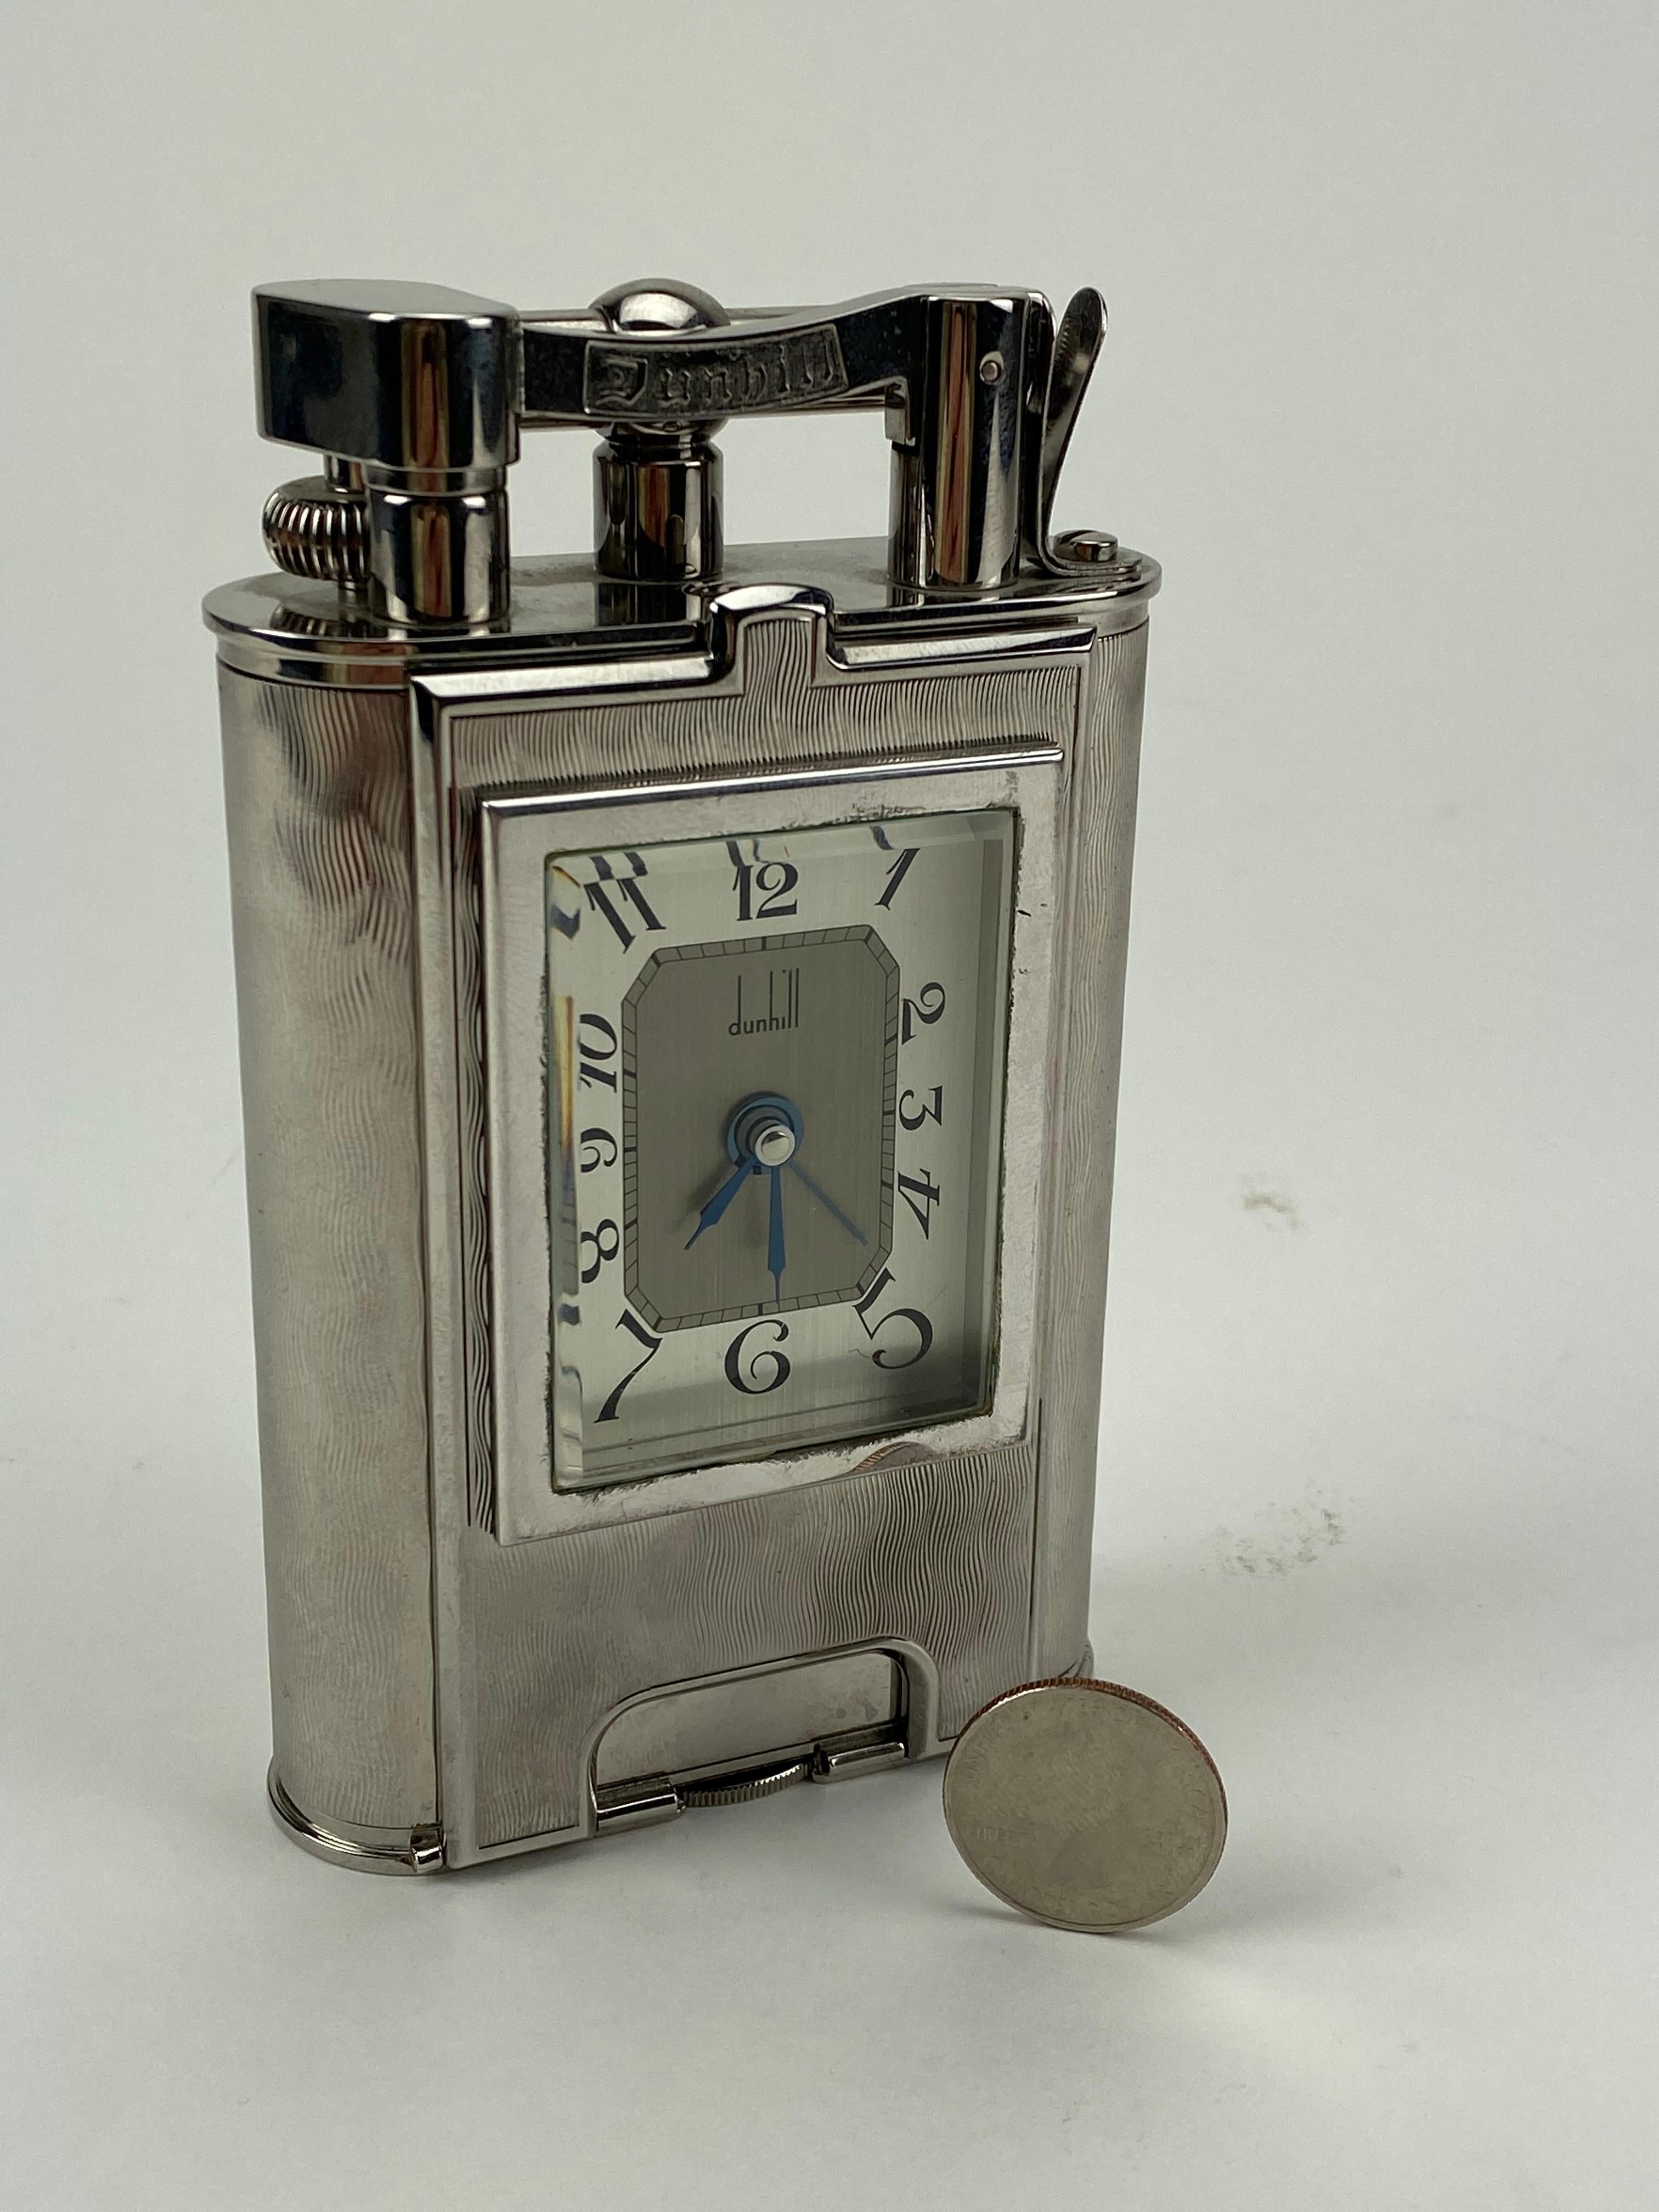 A very rare piece from Dunhill, limited to 200 pieces, this lighter/clock combination was made to honor some of Alfred Dunhill's original designs from the early 20th century. The scale and weight are truly incredible. Housed in it's original box. A